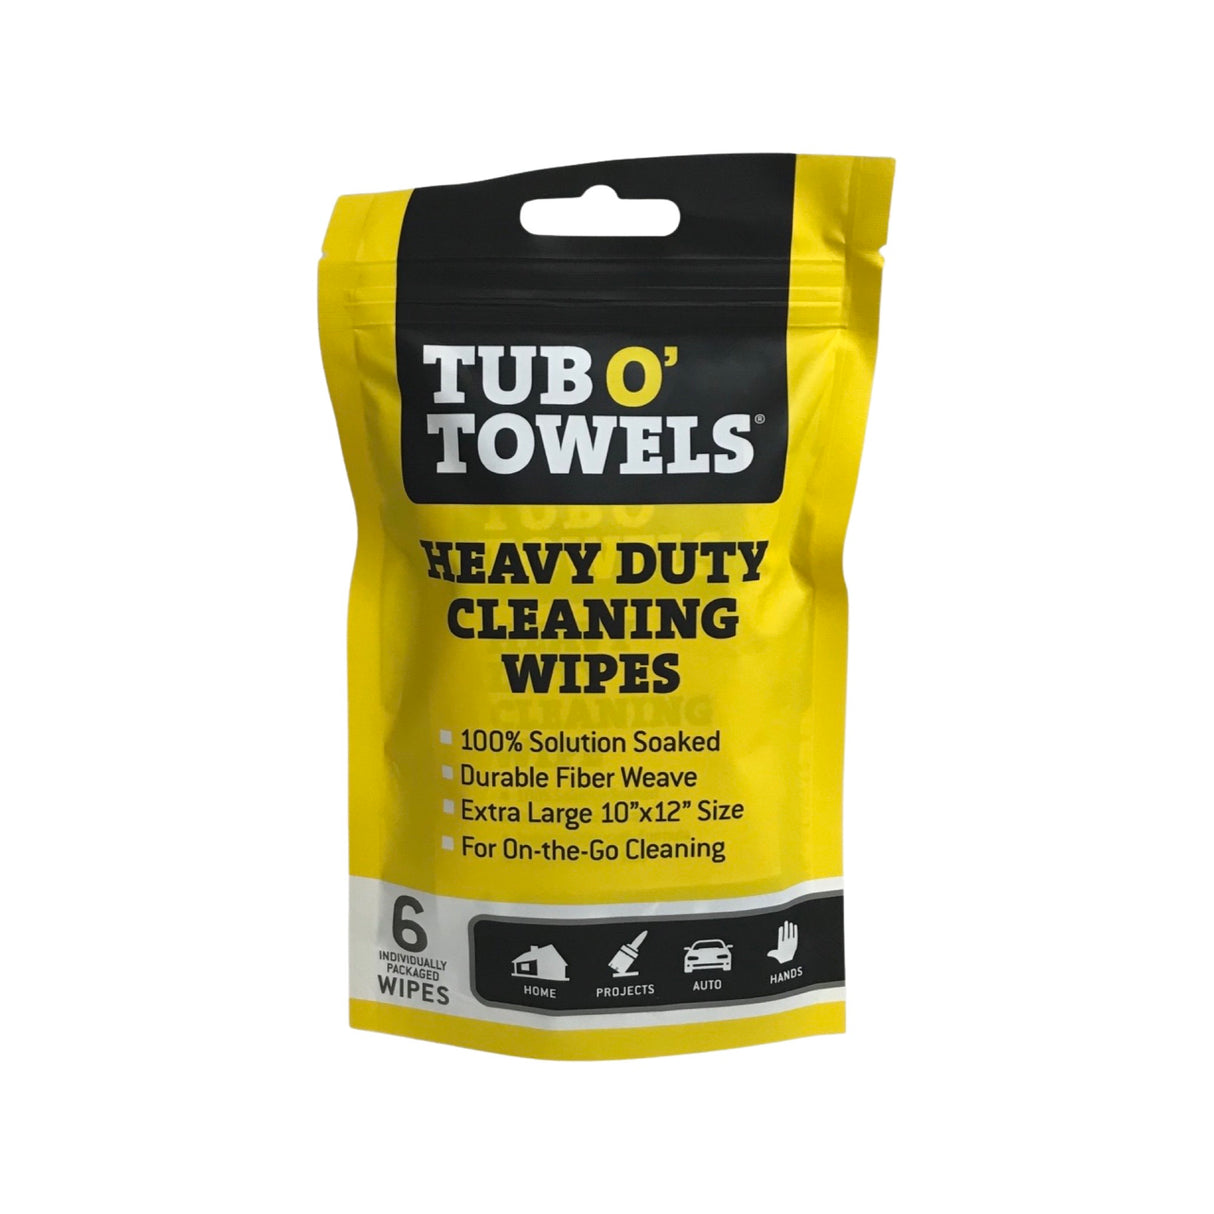 Tub O' Towels TW01-6 - 2 Pack Heavy Duty Multi-Surface Cleaning Wipes - Resealable